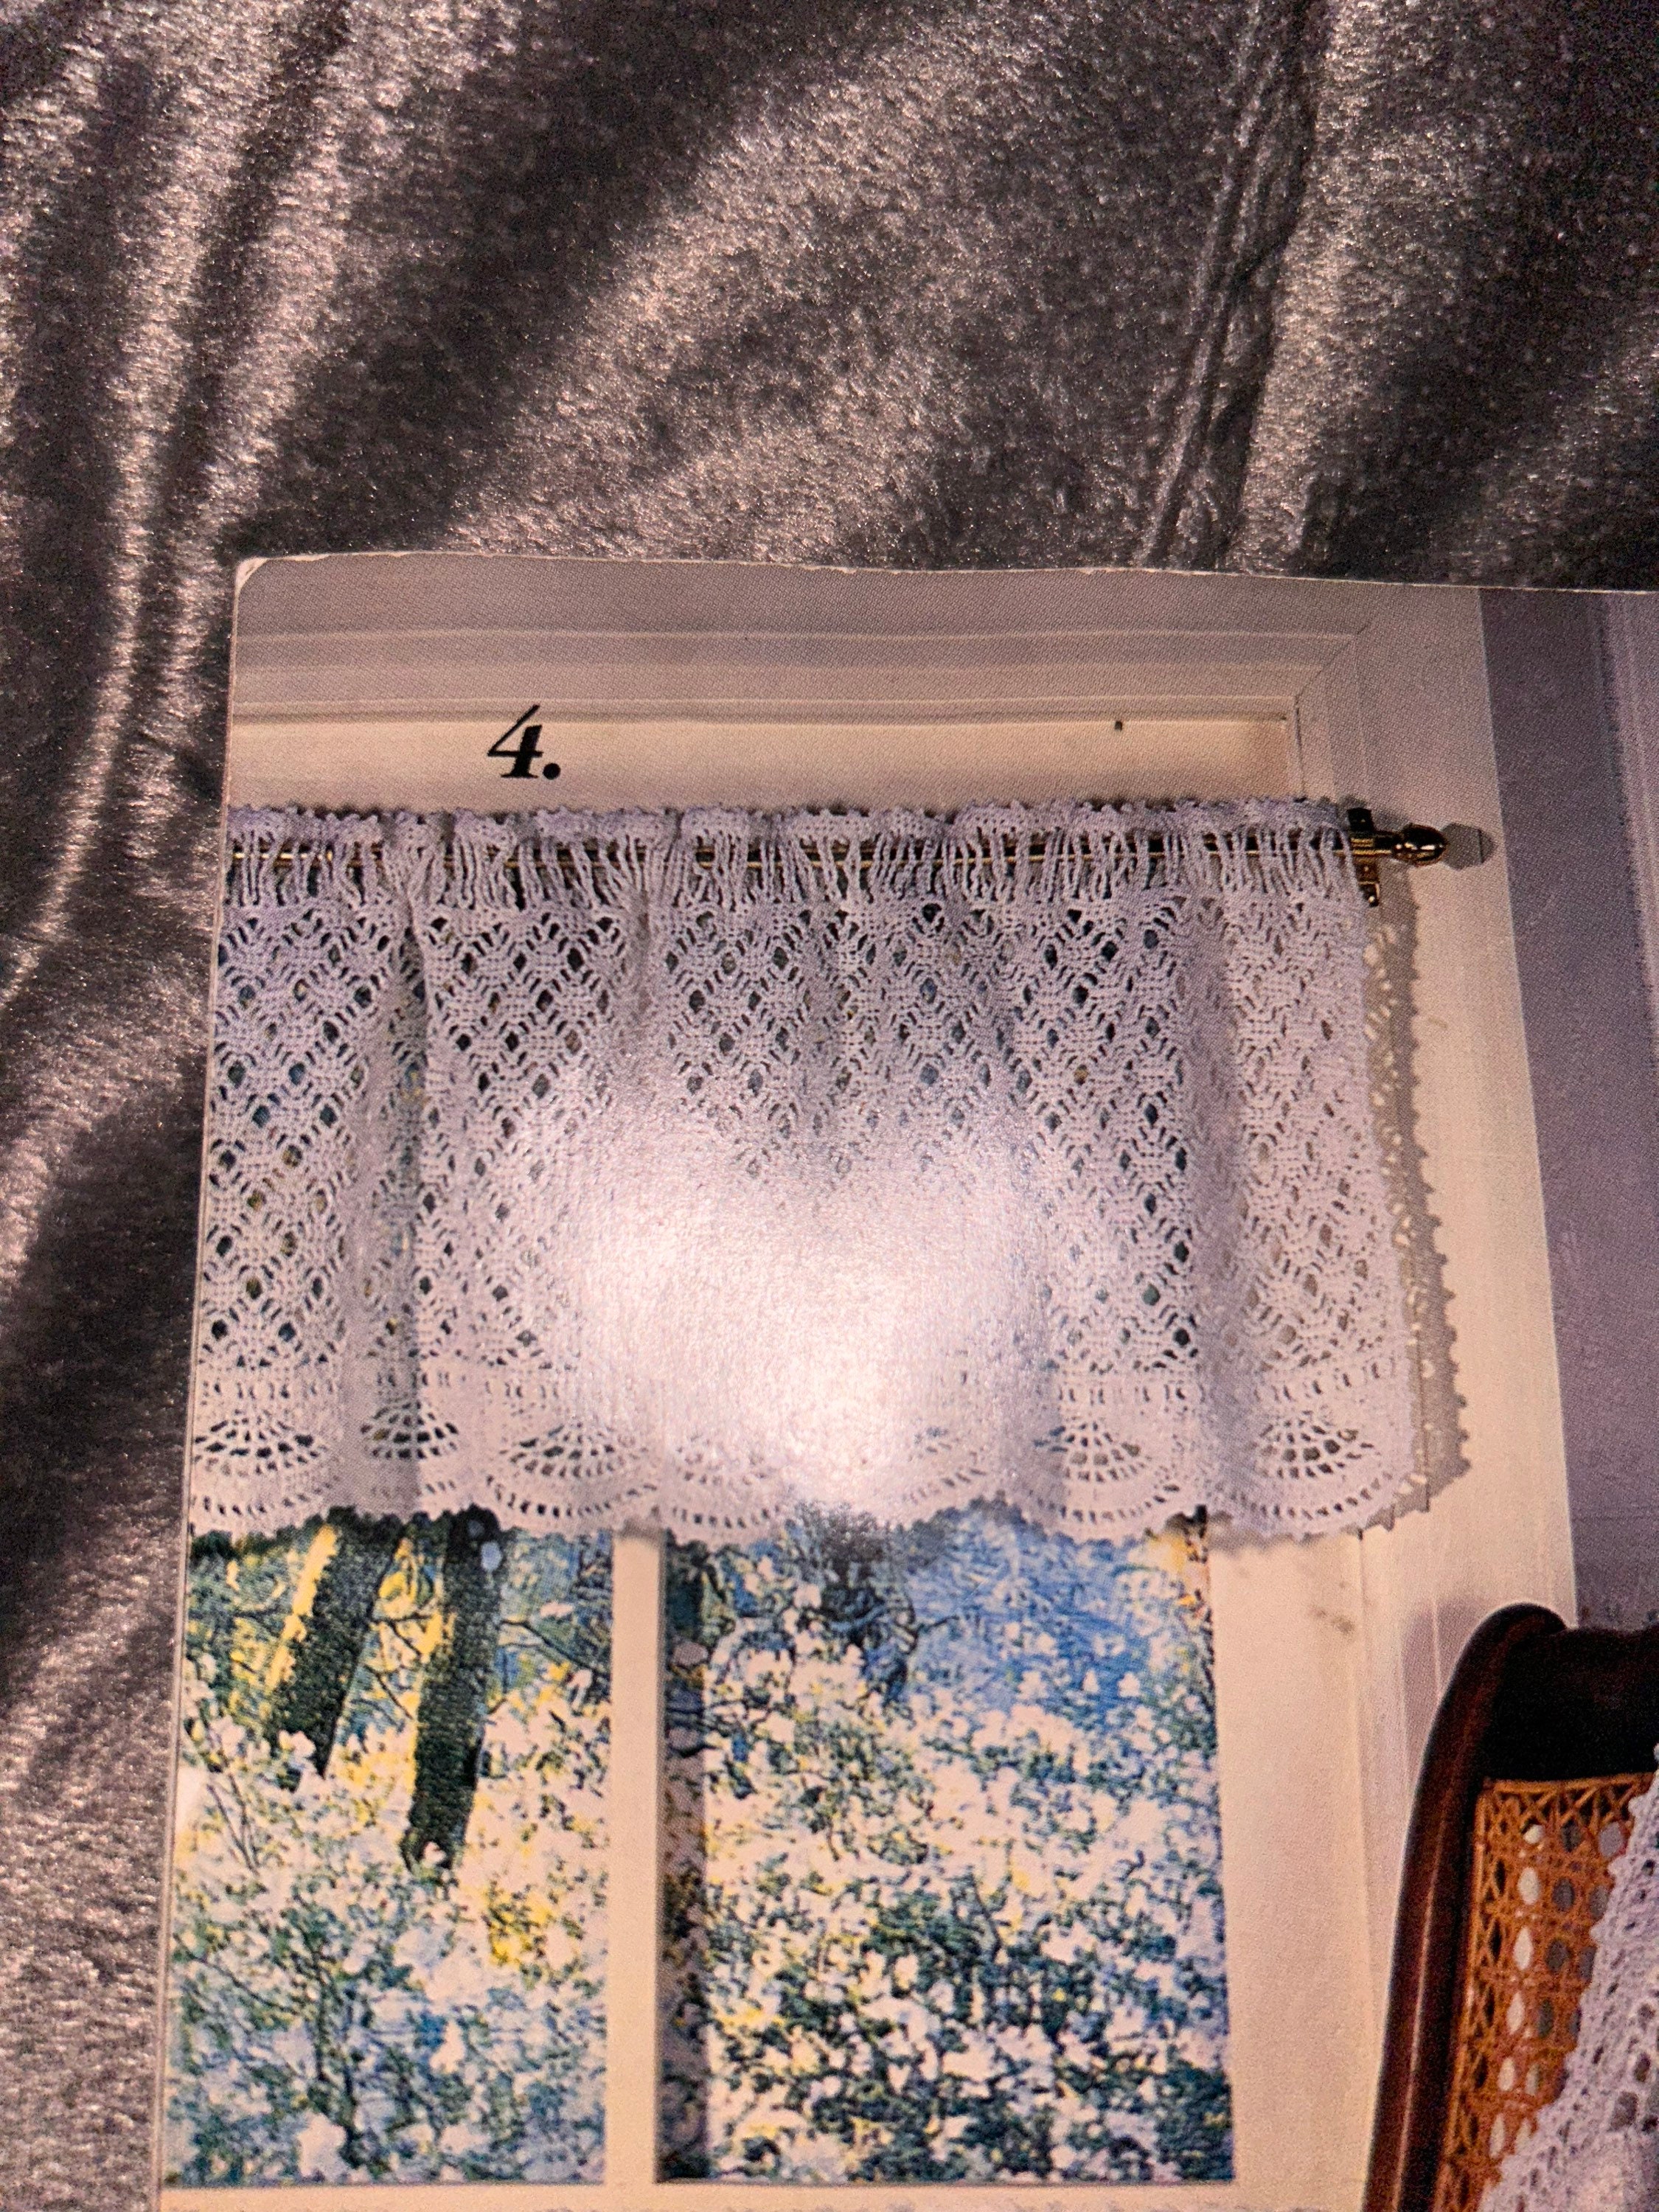 Filet Crochet Cafe Curtains Inspired by Mary Card Designs – Long